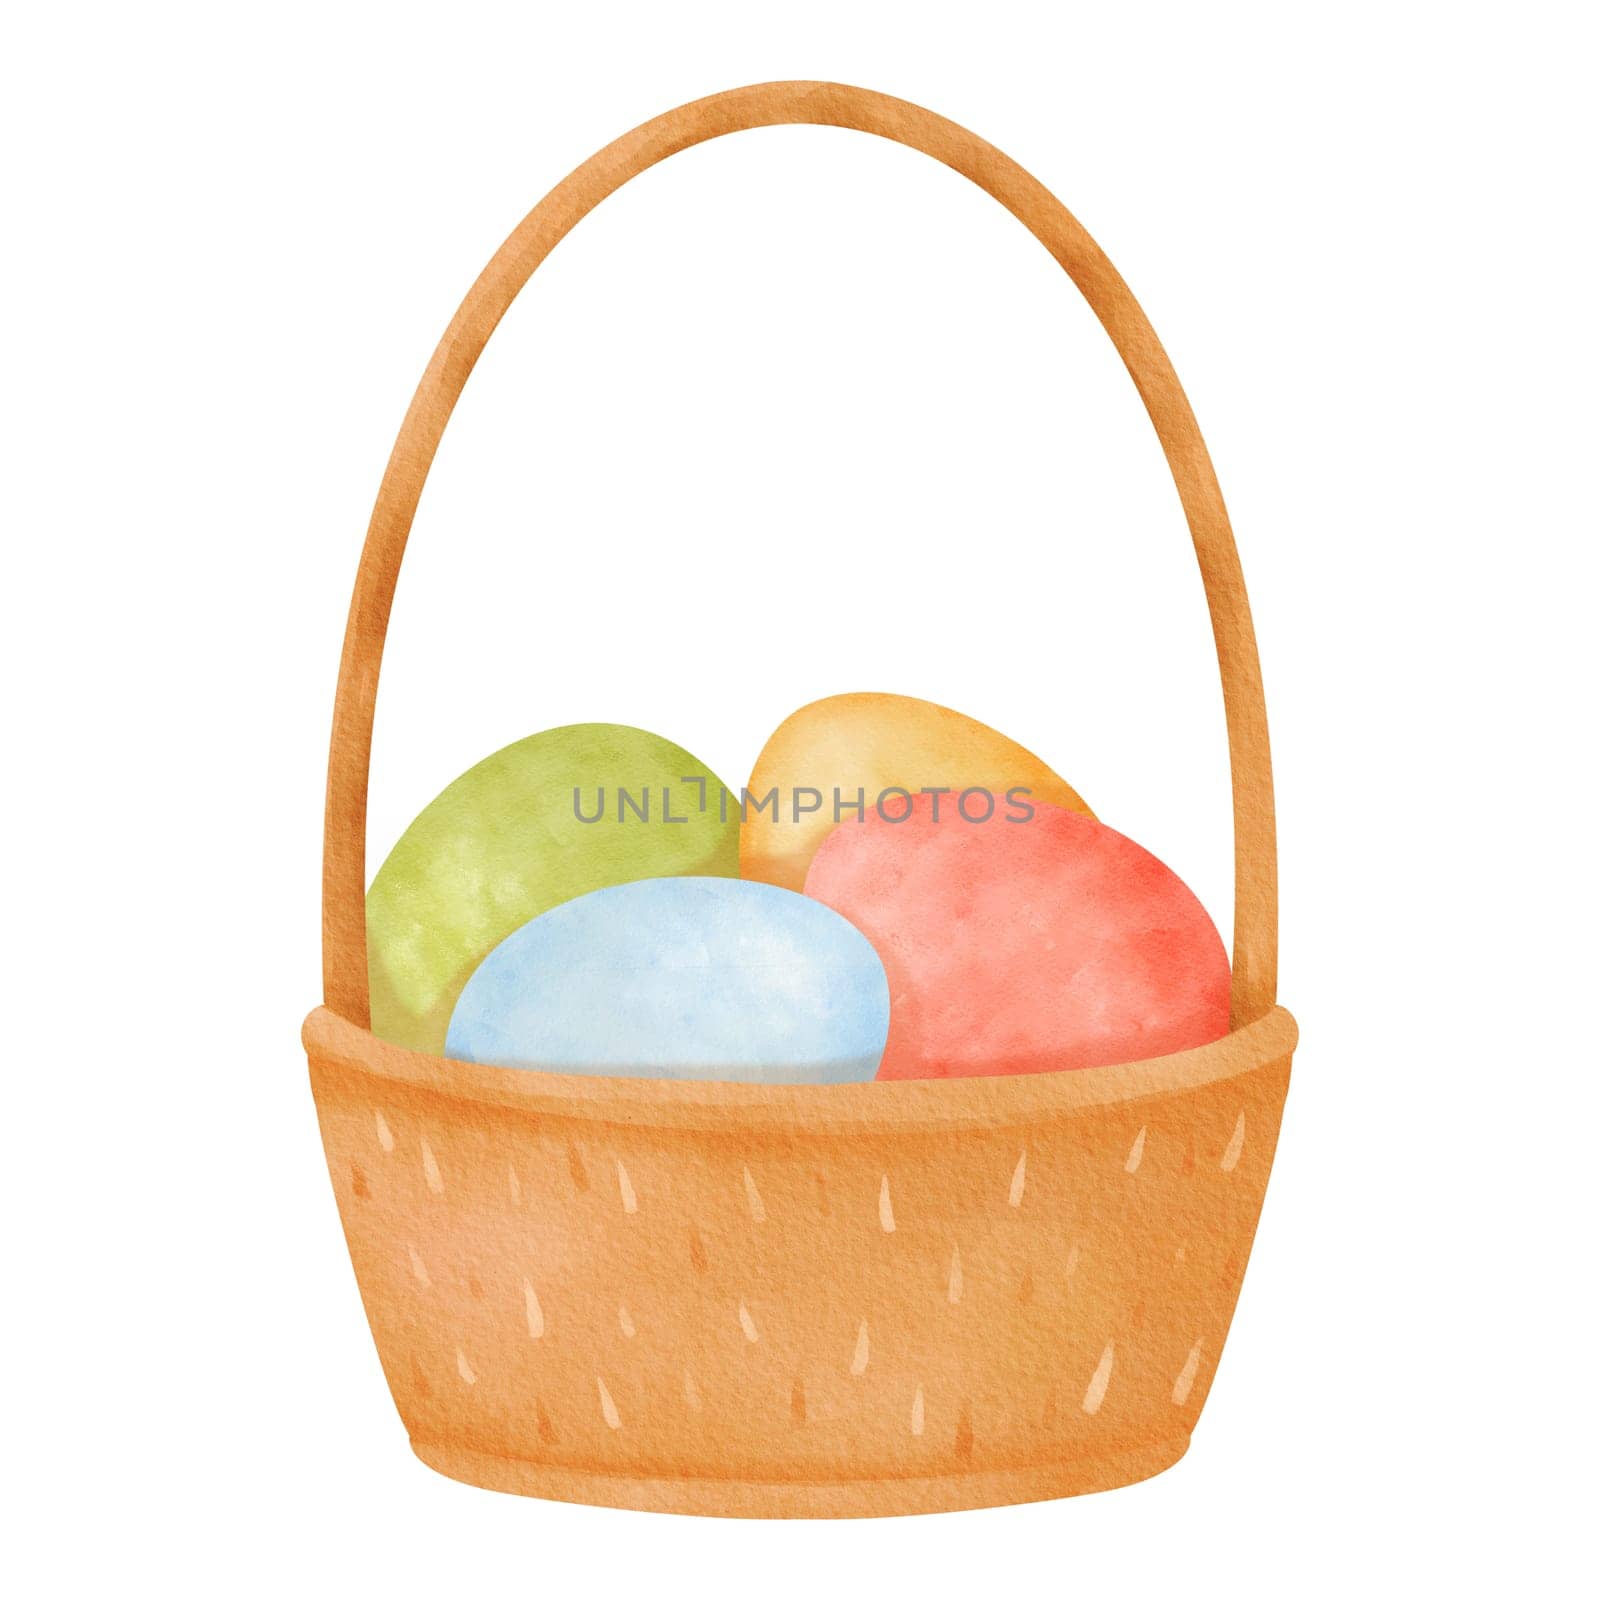 Cartoon-style wooden basket with a tall handle. Woven crate filled with colorful Easter eggs. Dyed chicken eggs symbolizing spring. Eco-friendly product. Watercolor isolated illustration by Art_Mari_Ka